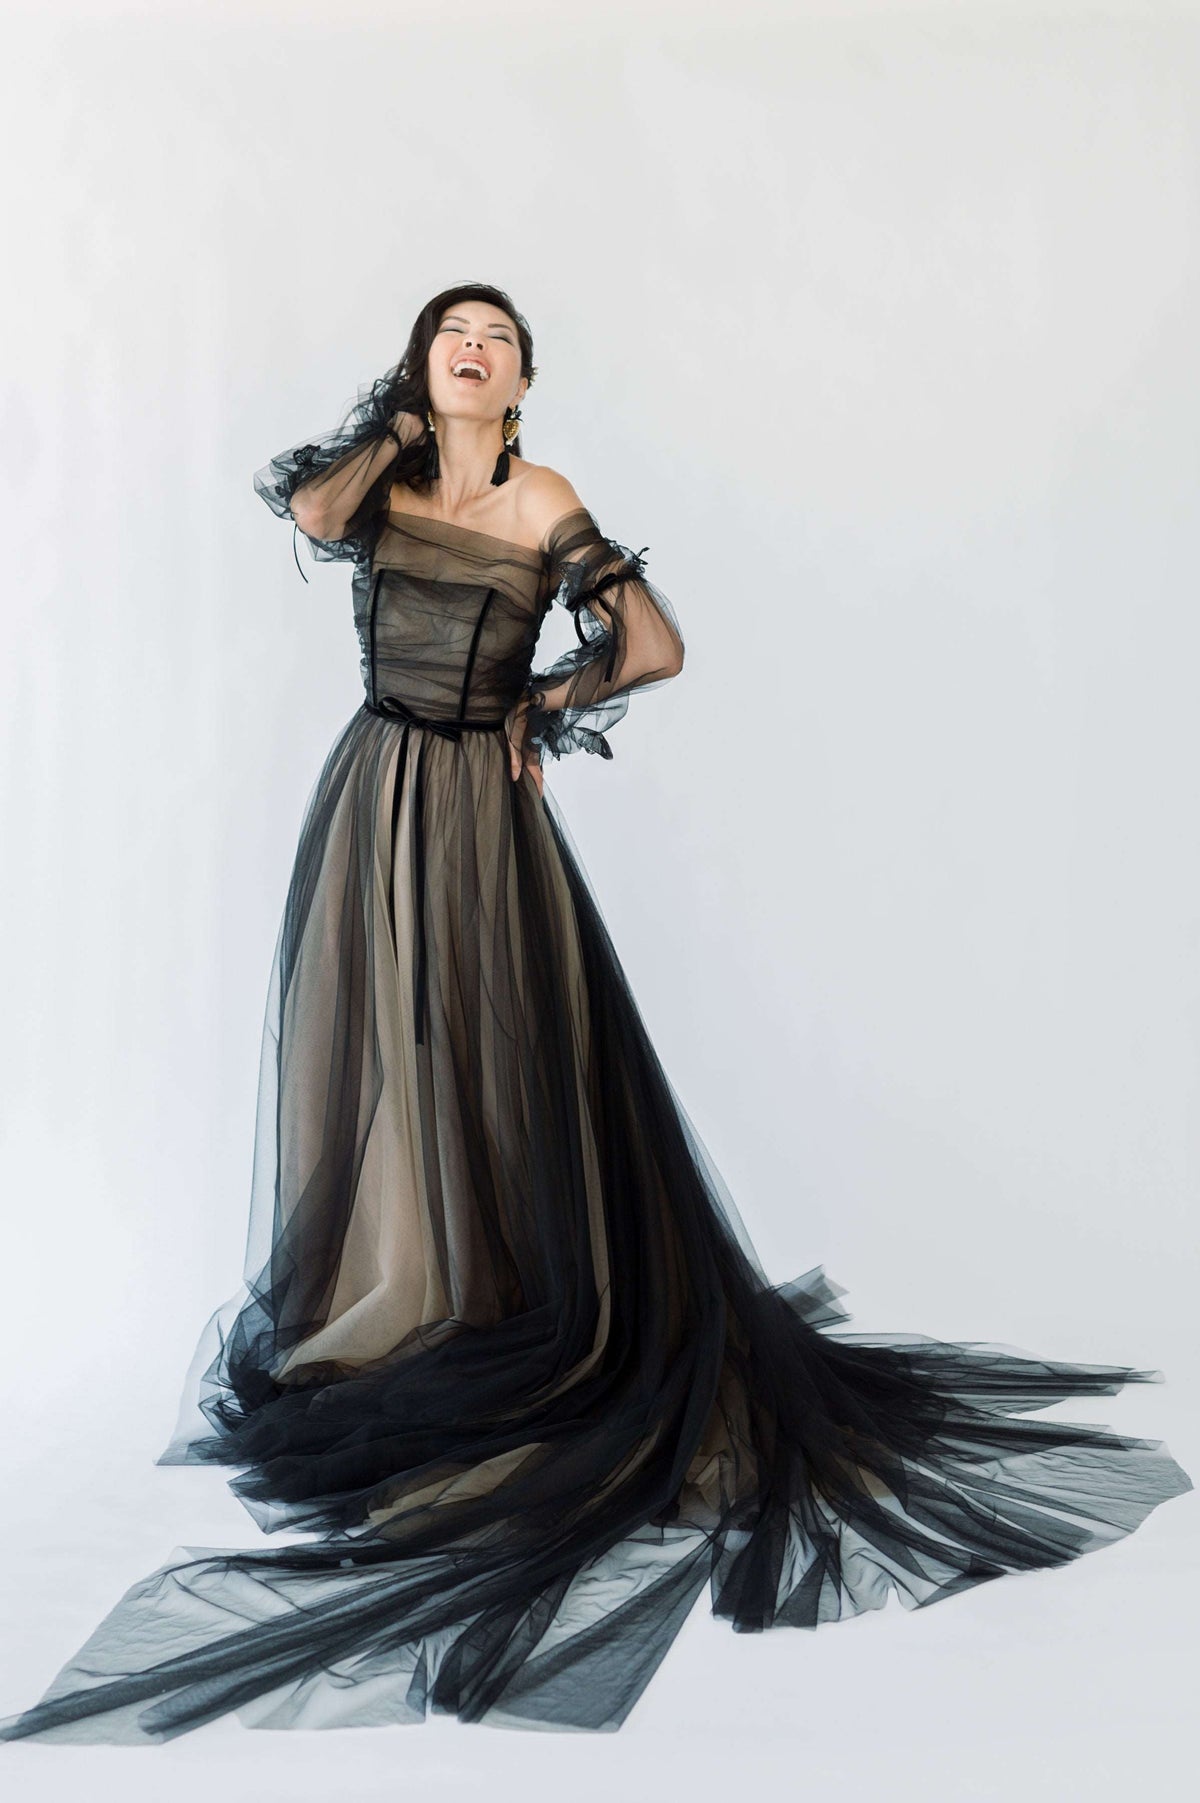 Black tulle wedding dress. Goth chic with a hint of whimsy. Unique wedding dress for unconventional brides. custom made by Catherine Langlois, Toronto, Canada.